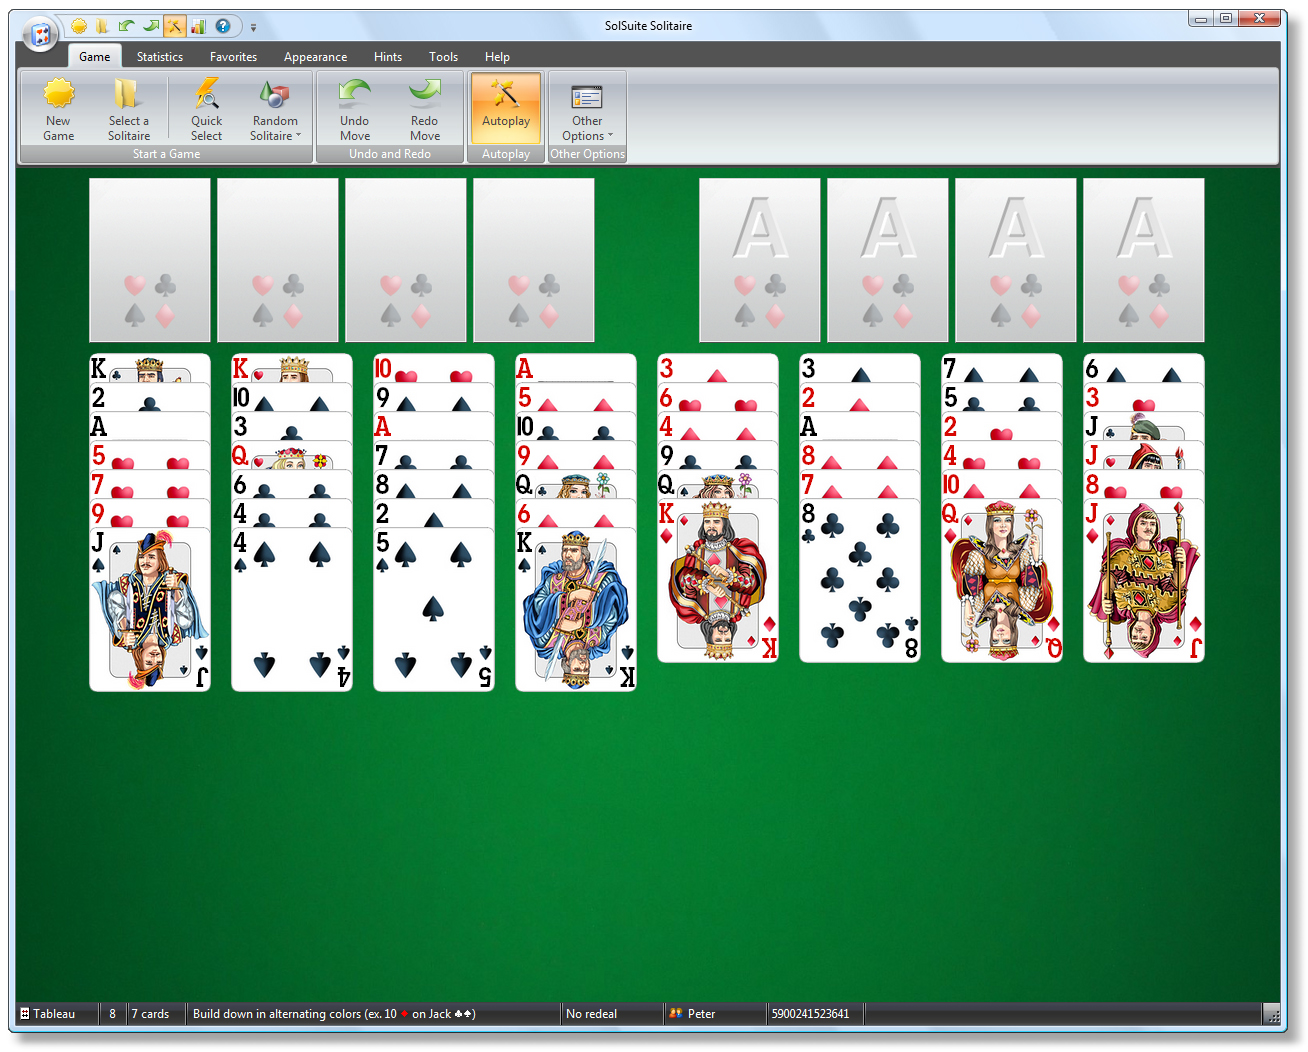 SolSuite Solitaire - FreeCell screenshot 1280x1024